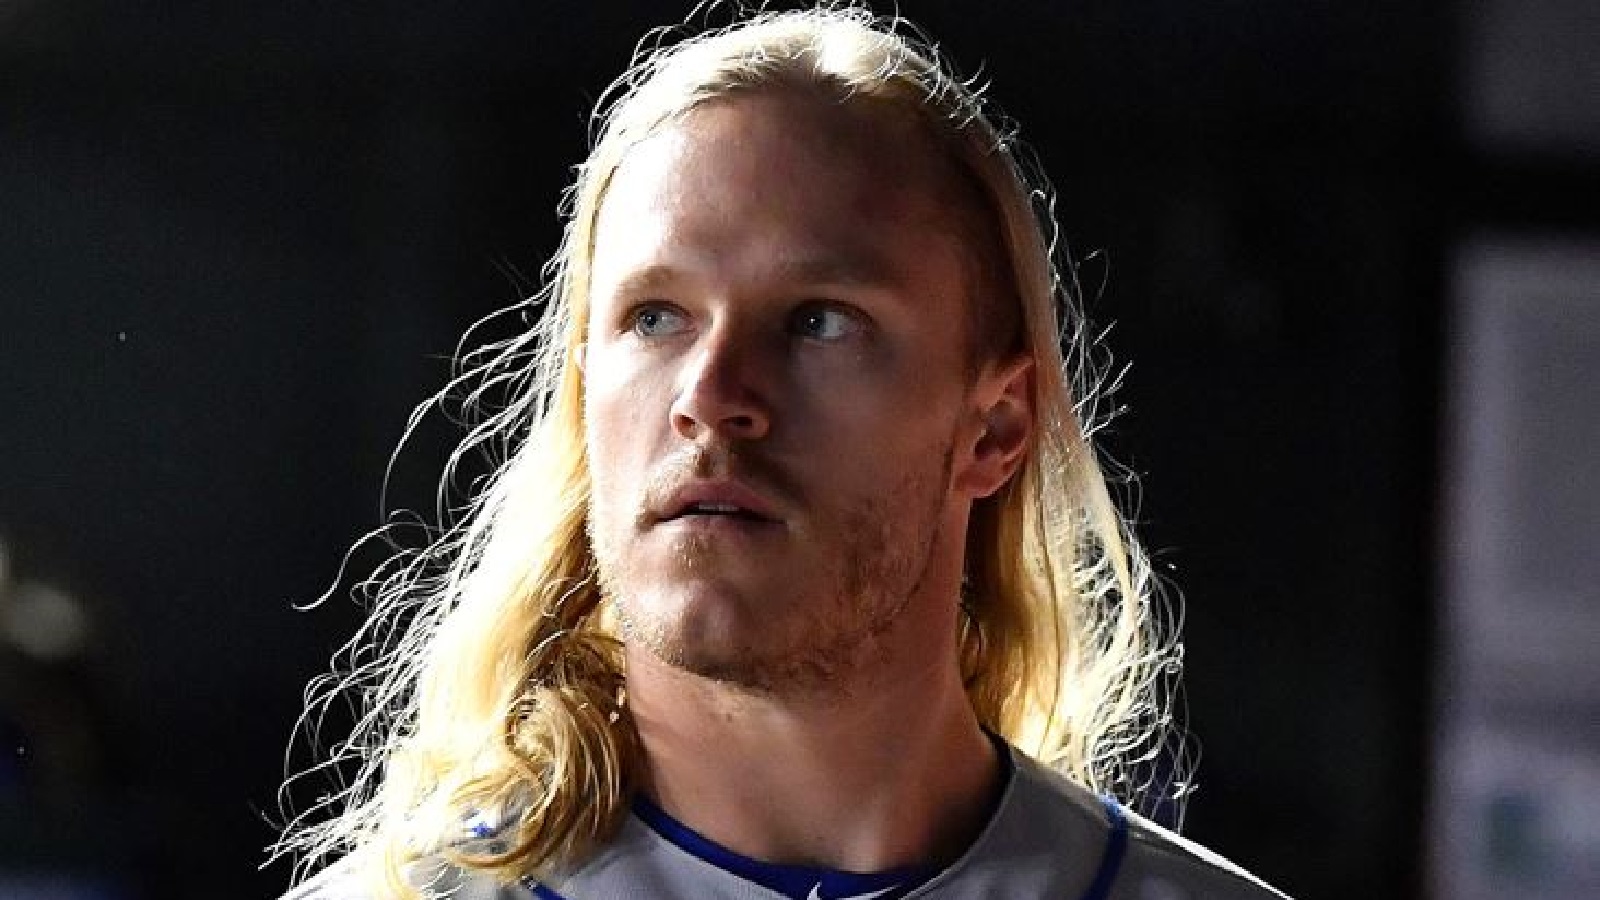 Noah Syndergaard signs with Angels, leaving NY Mets, report says